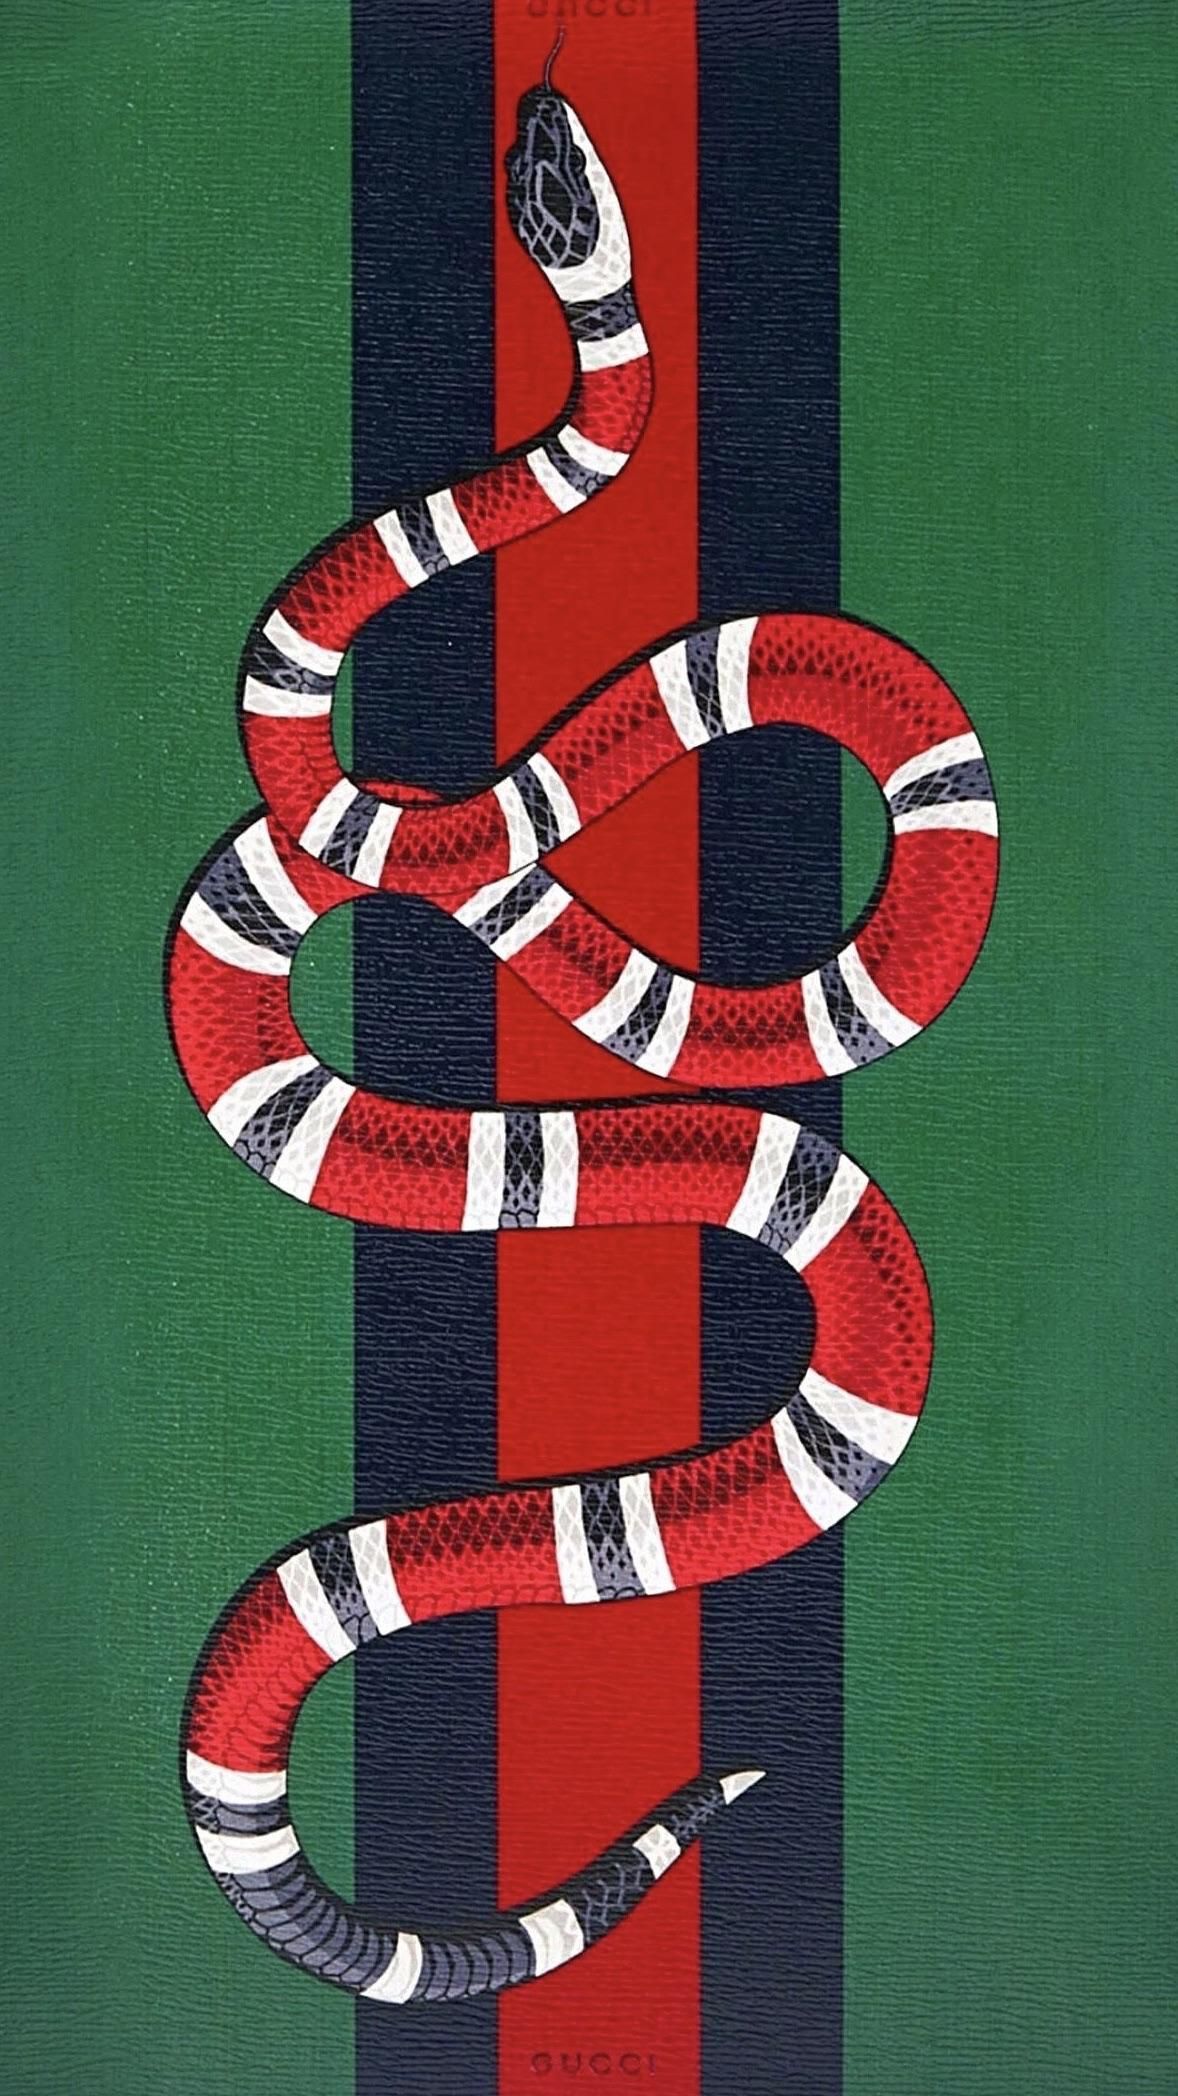 HD gucci snake wallpapers